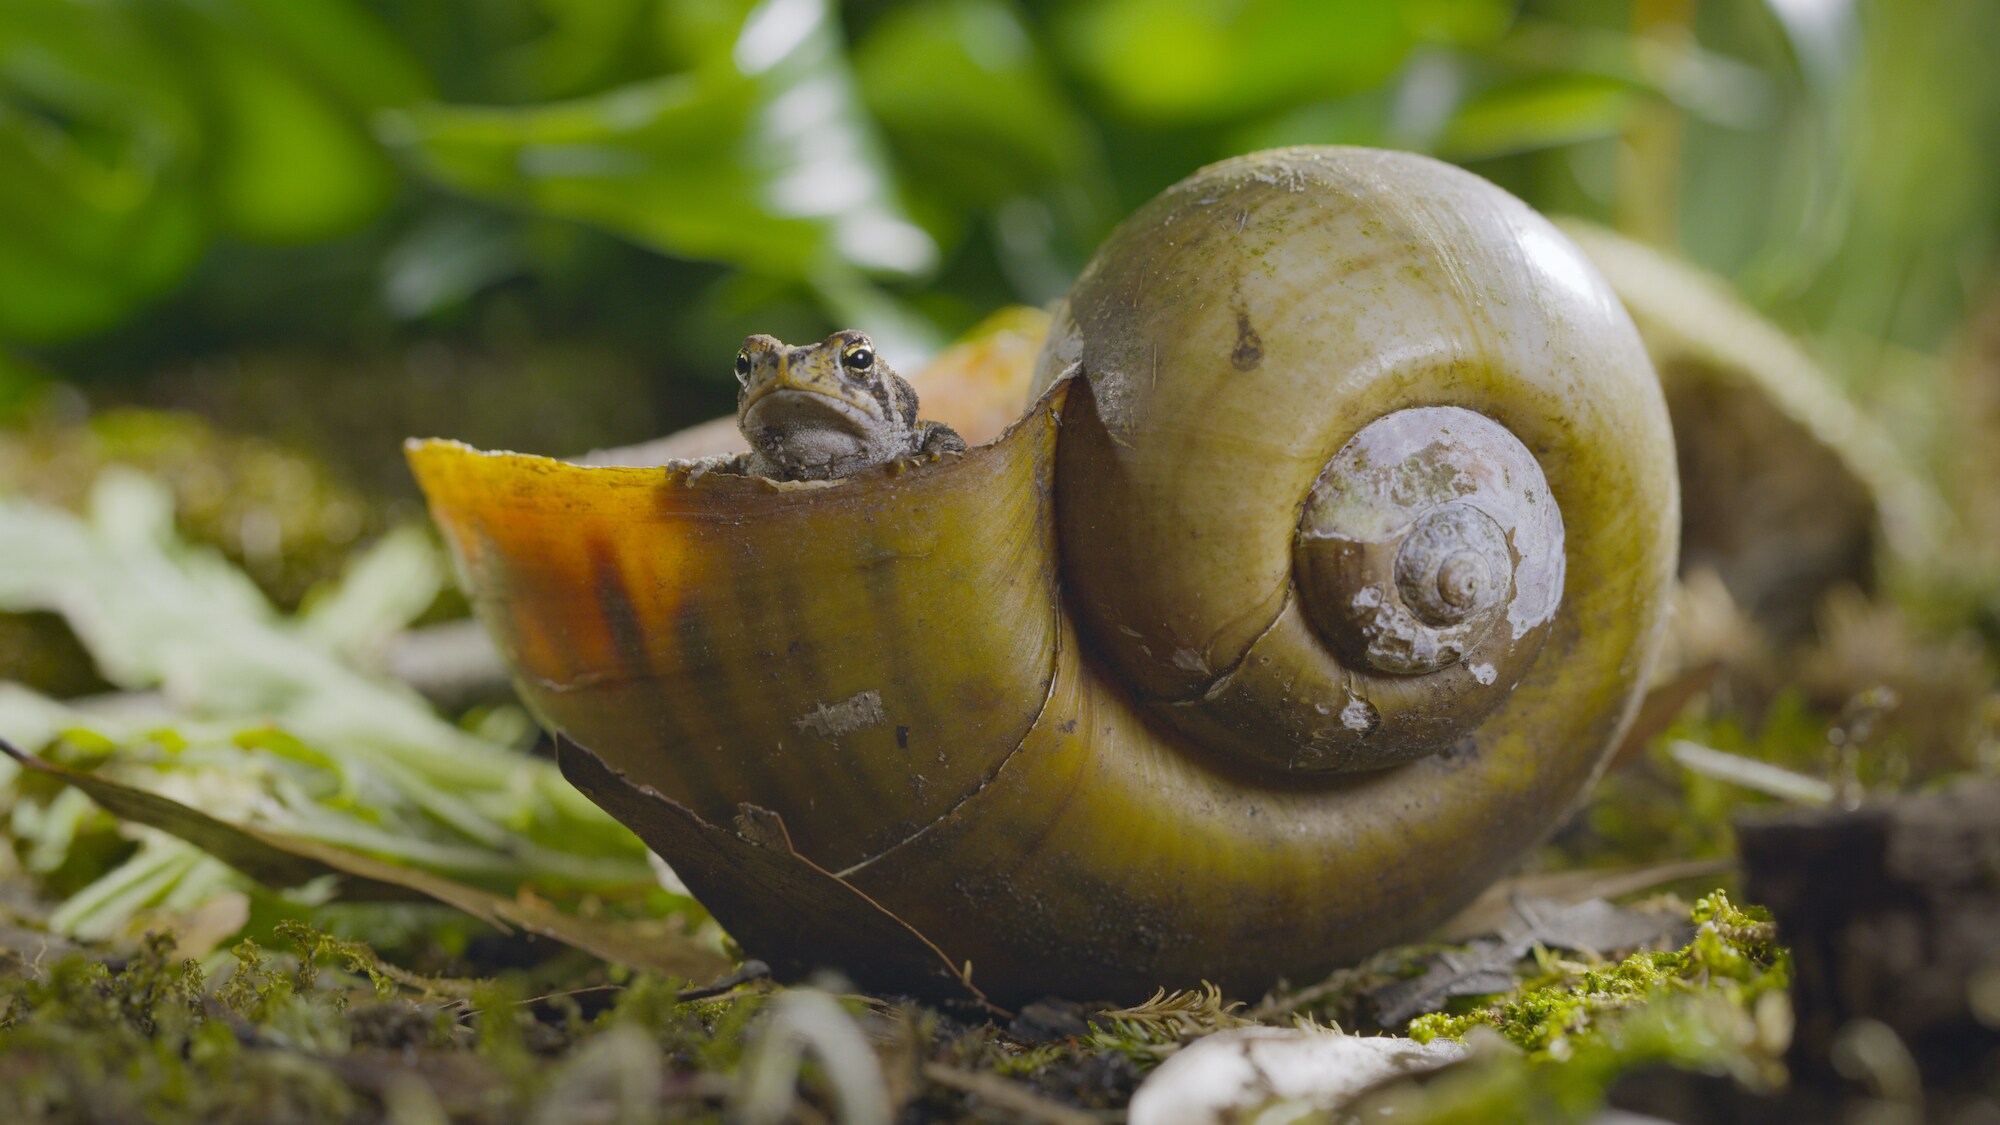 An Oak toad takes cover from predators, such as a garter snake, inside a snail shell. (National Geographic for Disney+)